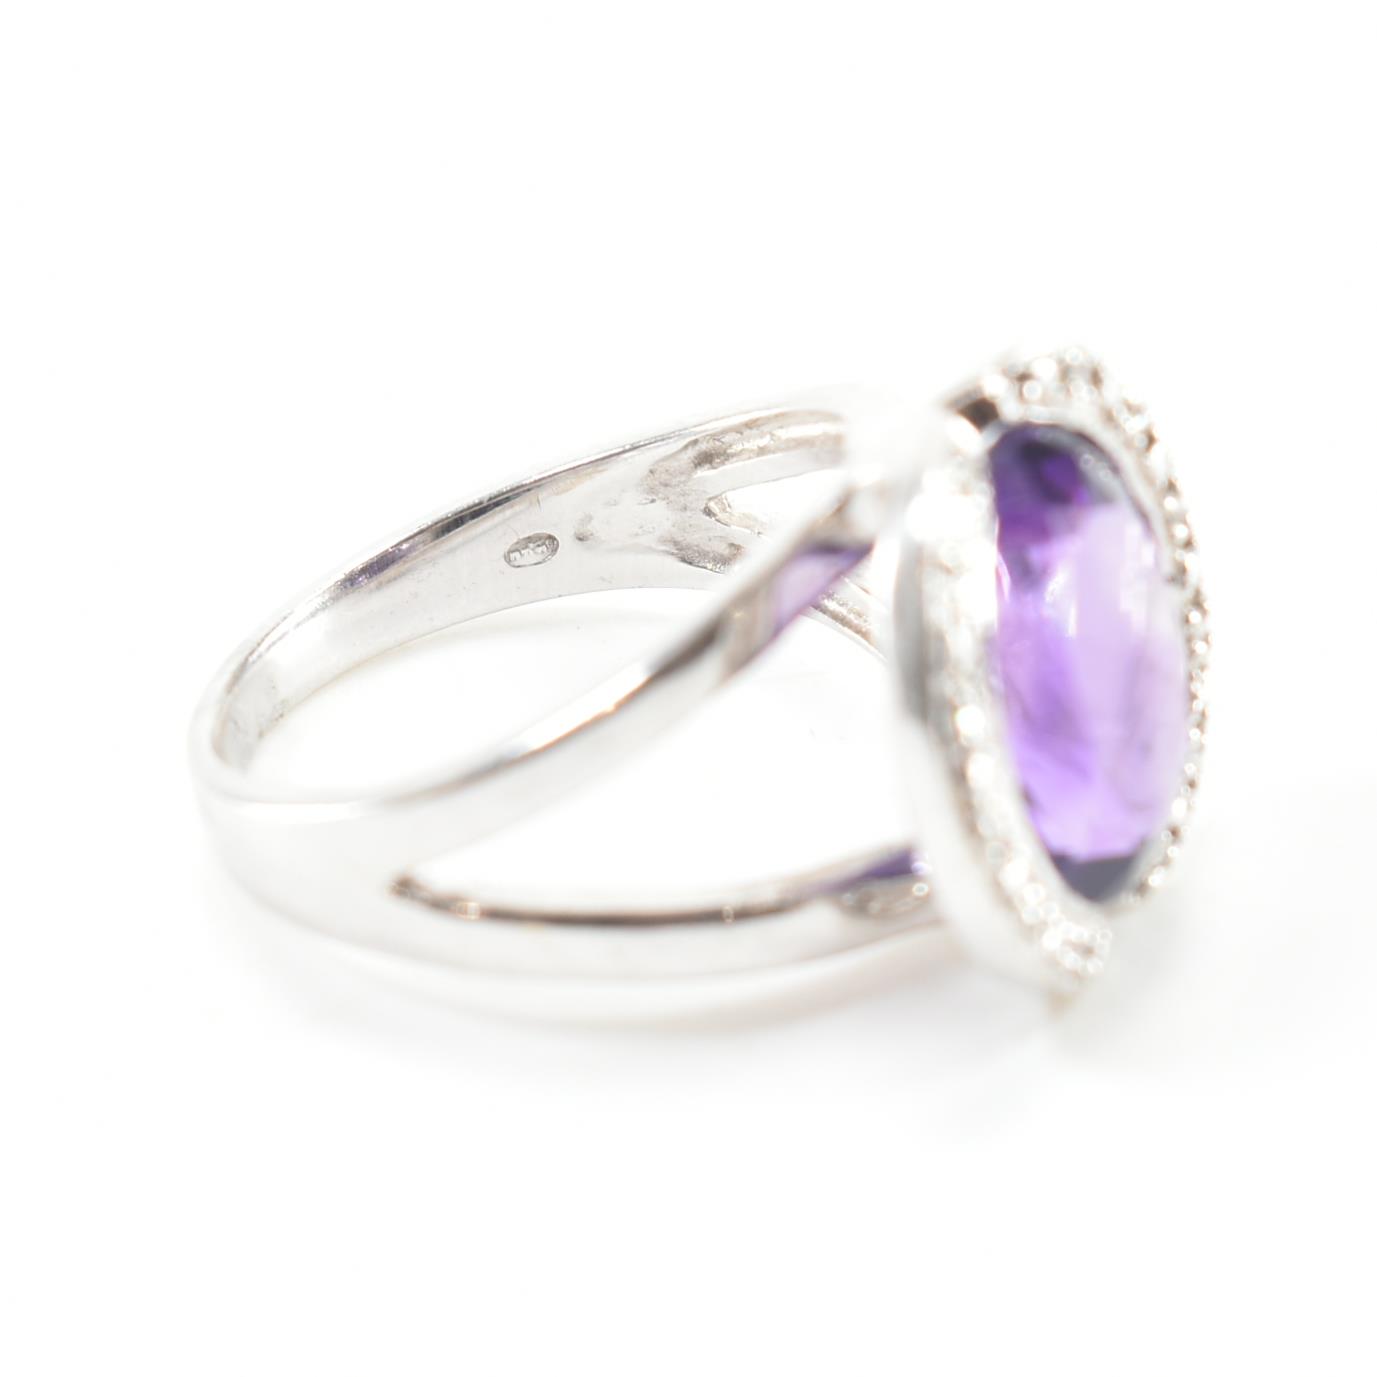 WITHDRAWN - FRENCH 18CT WHITE GOLD AMETHYST & DIAMOND COCKTAIL RING - Image 8 of 8